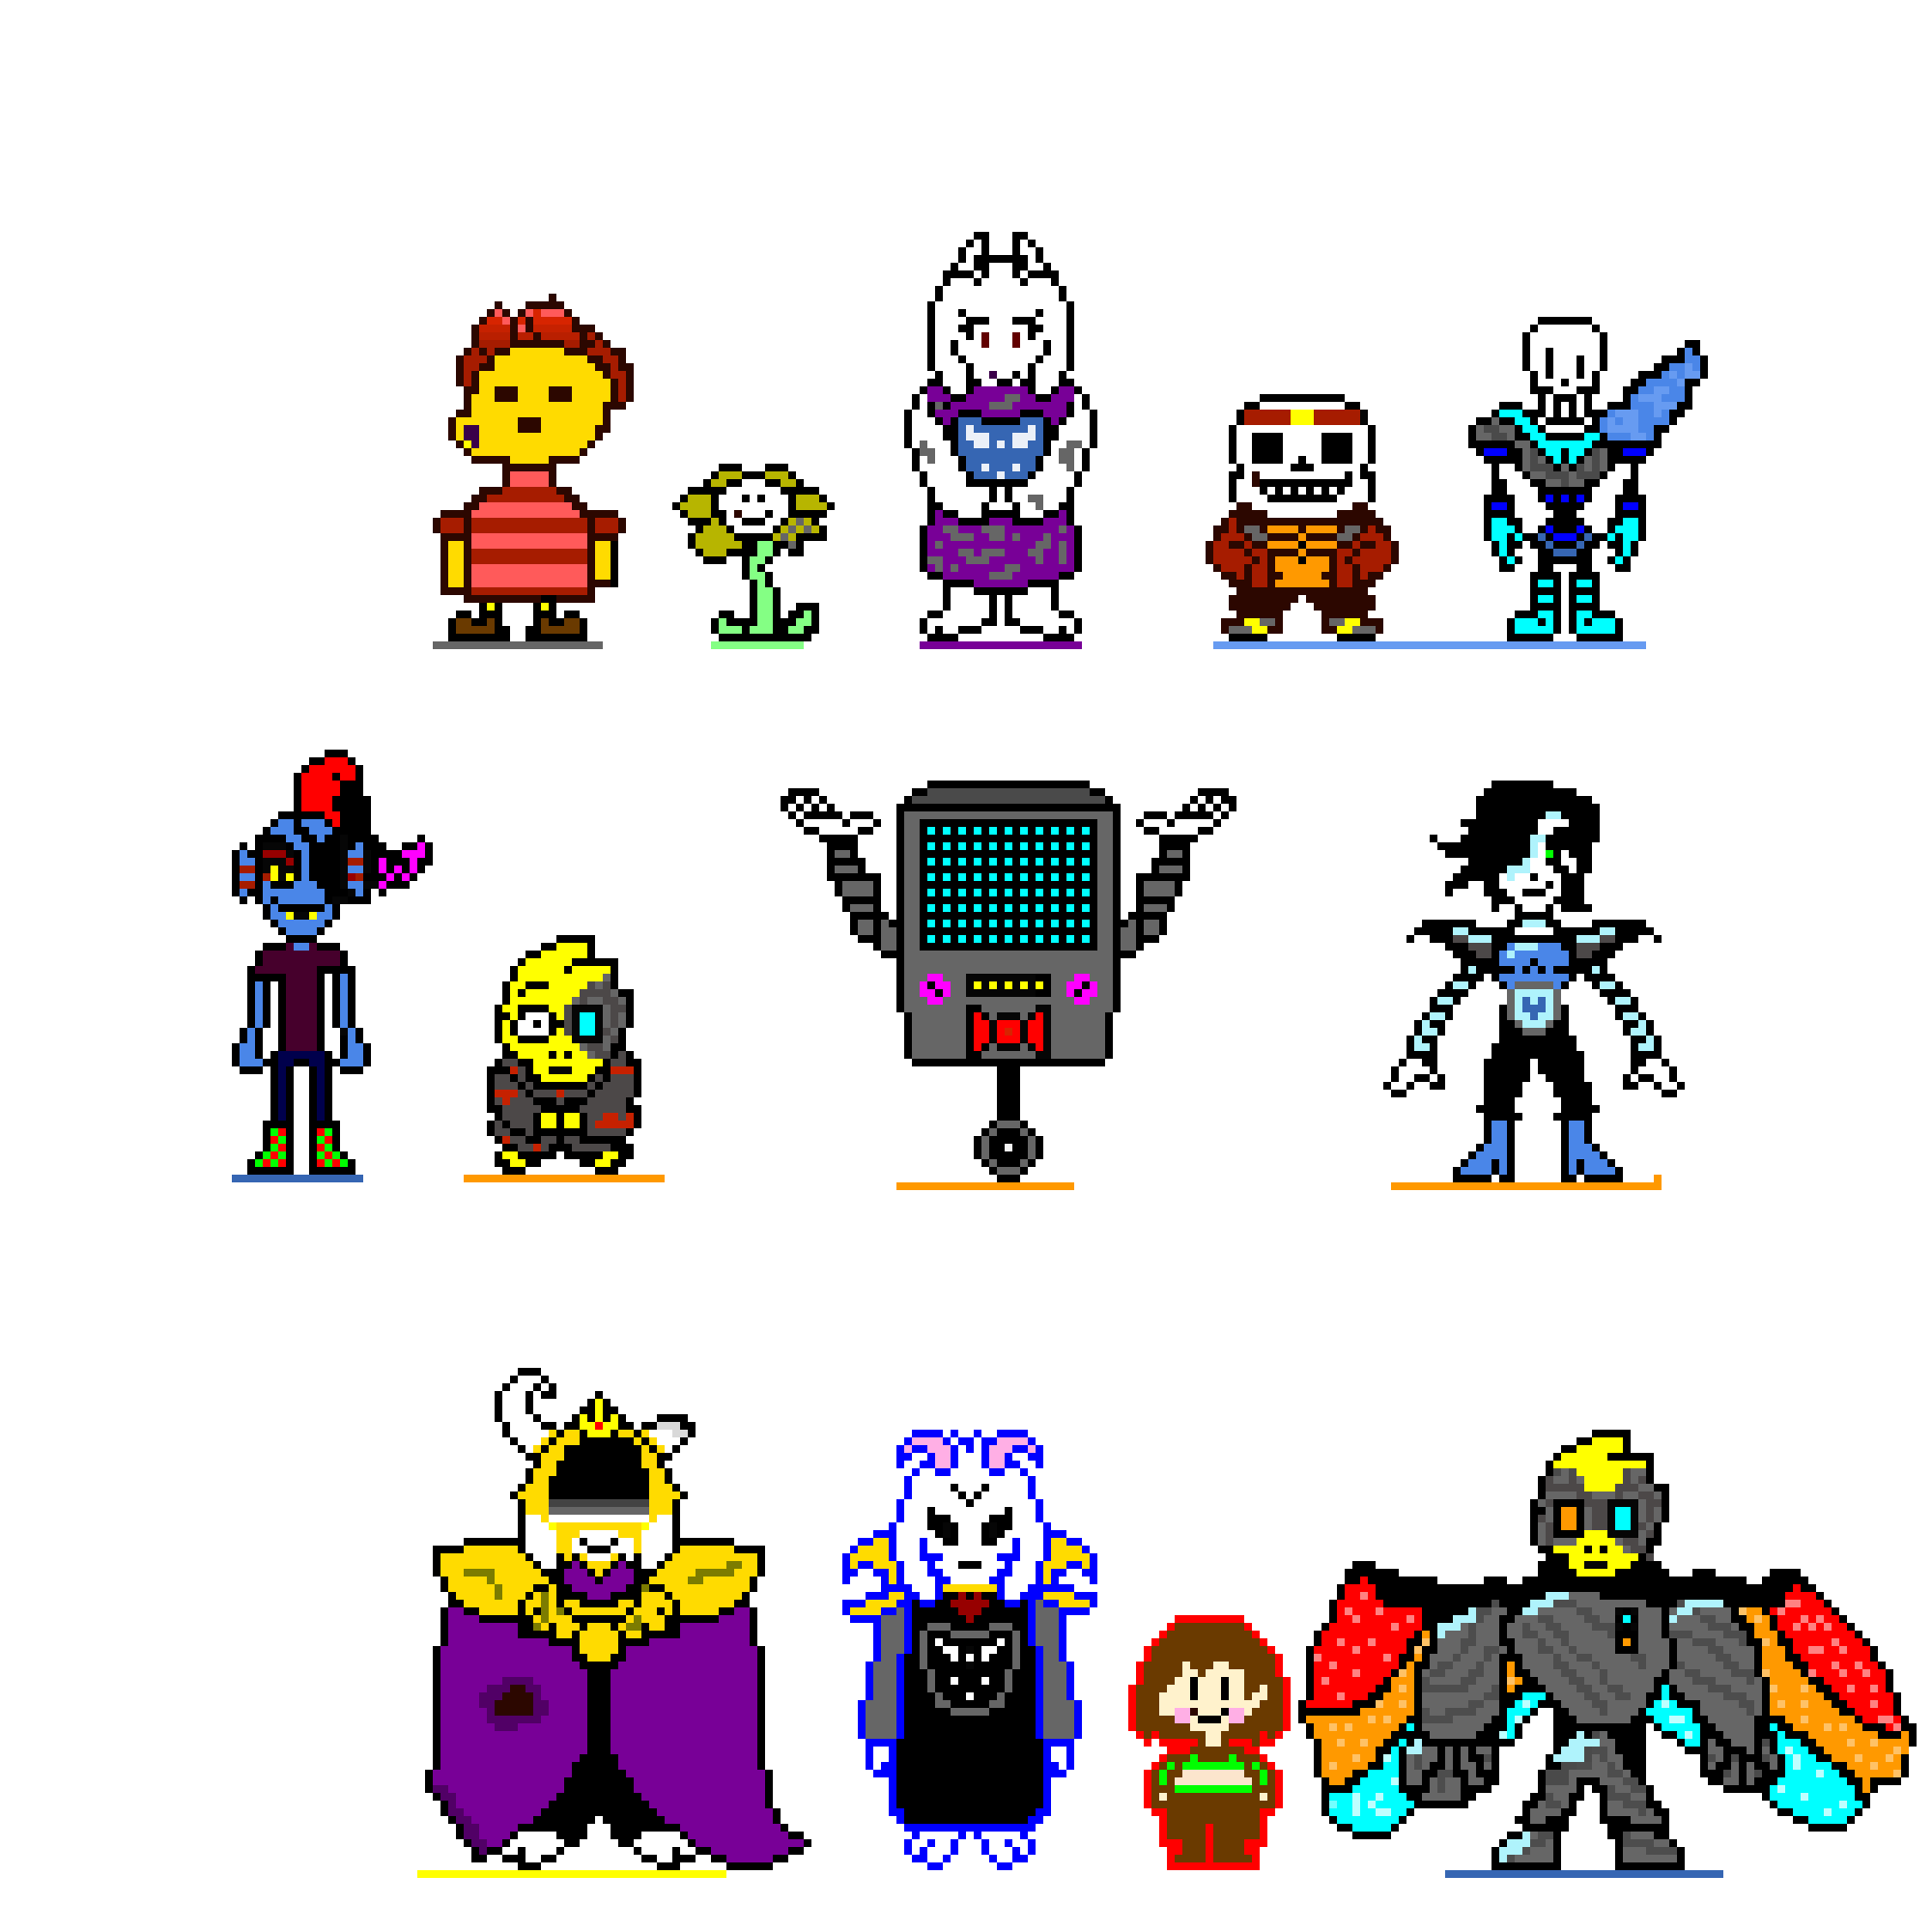 Updated RouteSwap characters